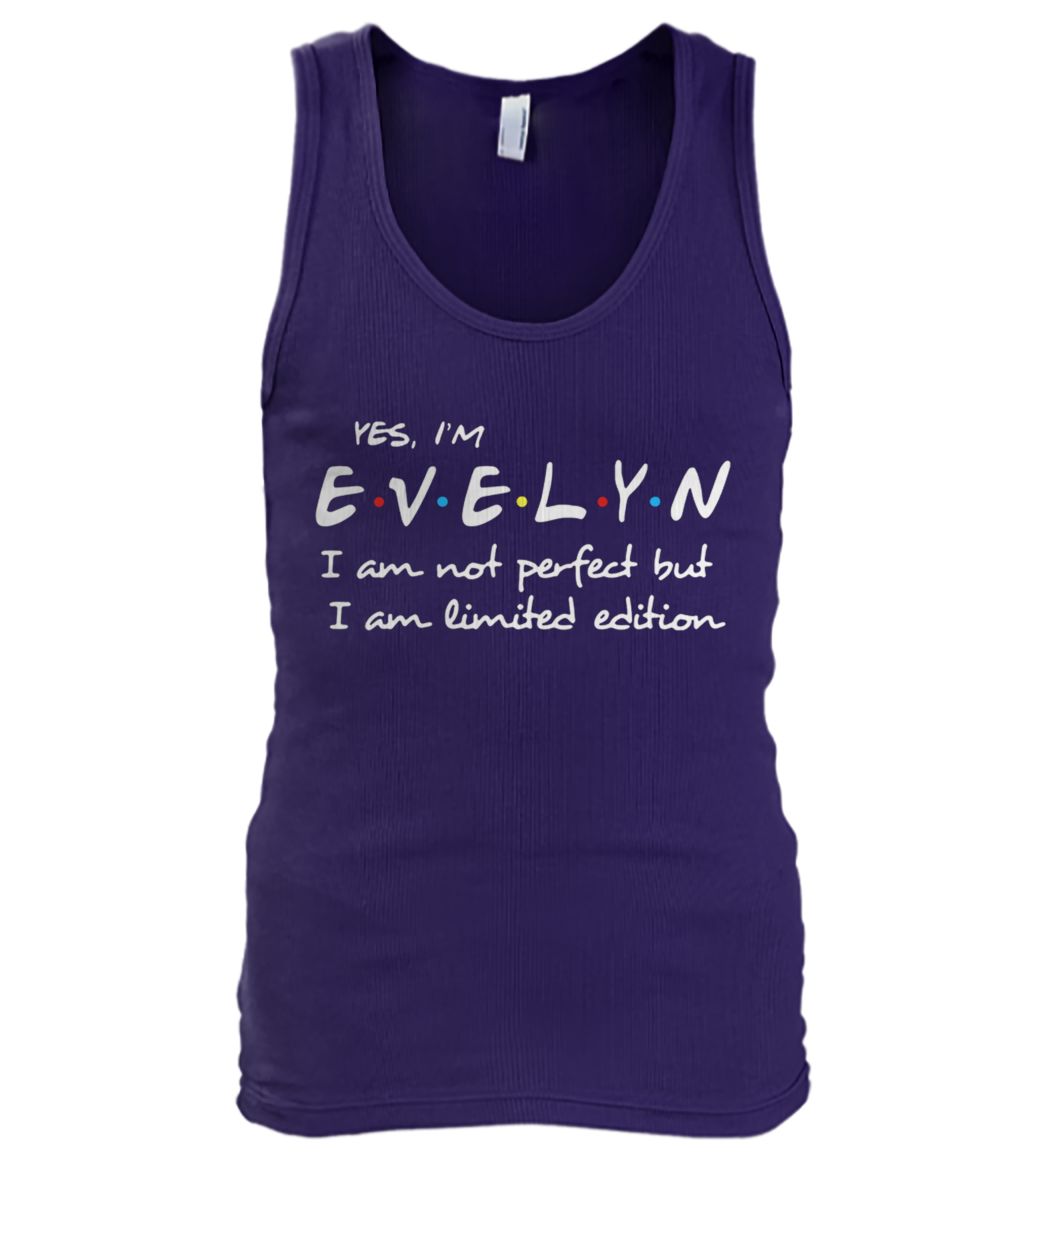 Yes I'm evelyn I am not perfect but I am limited edition men's tank top